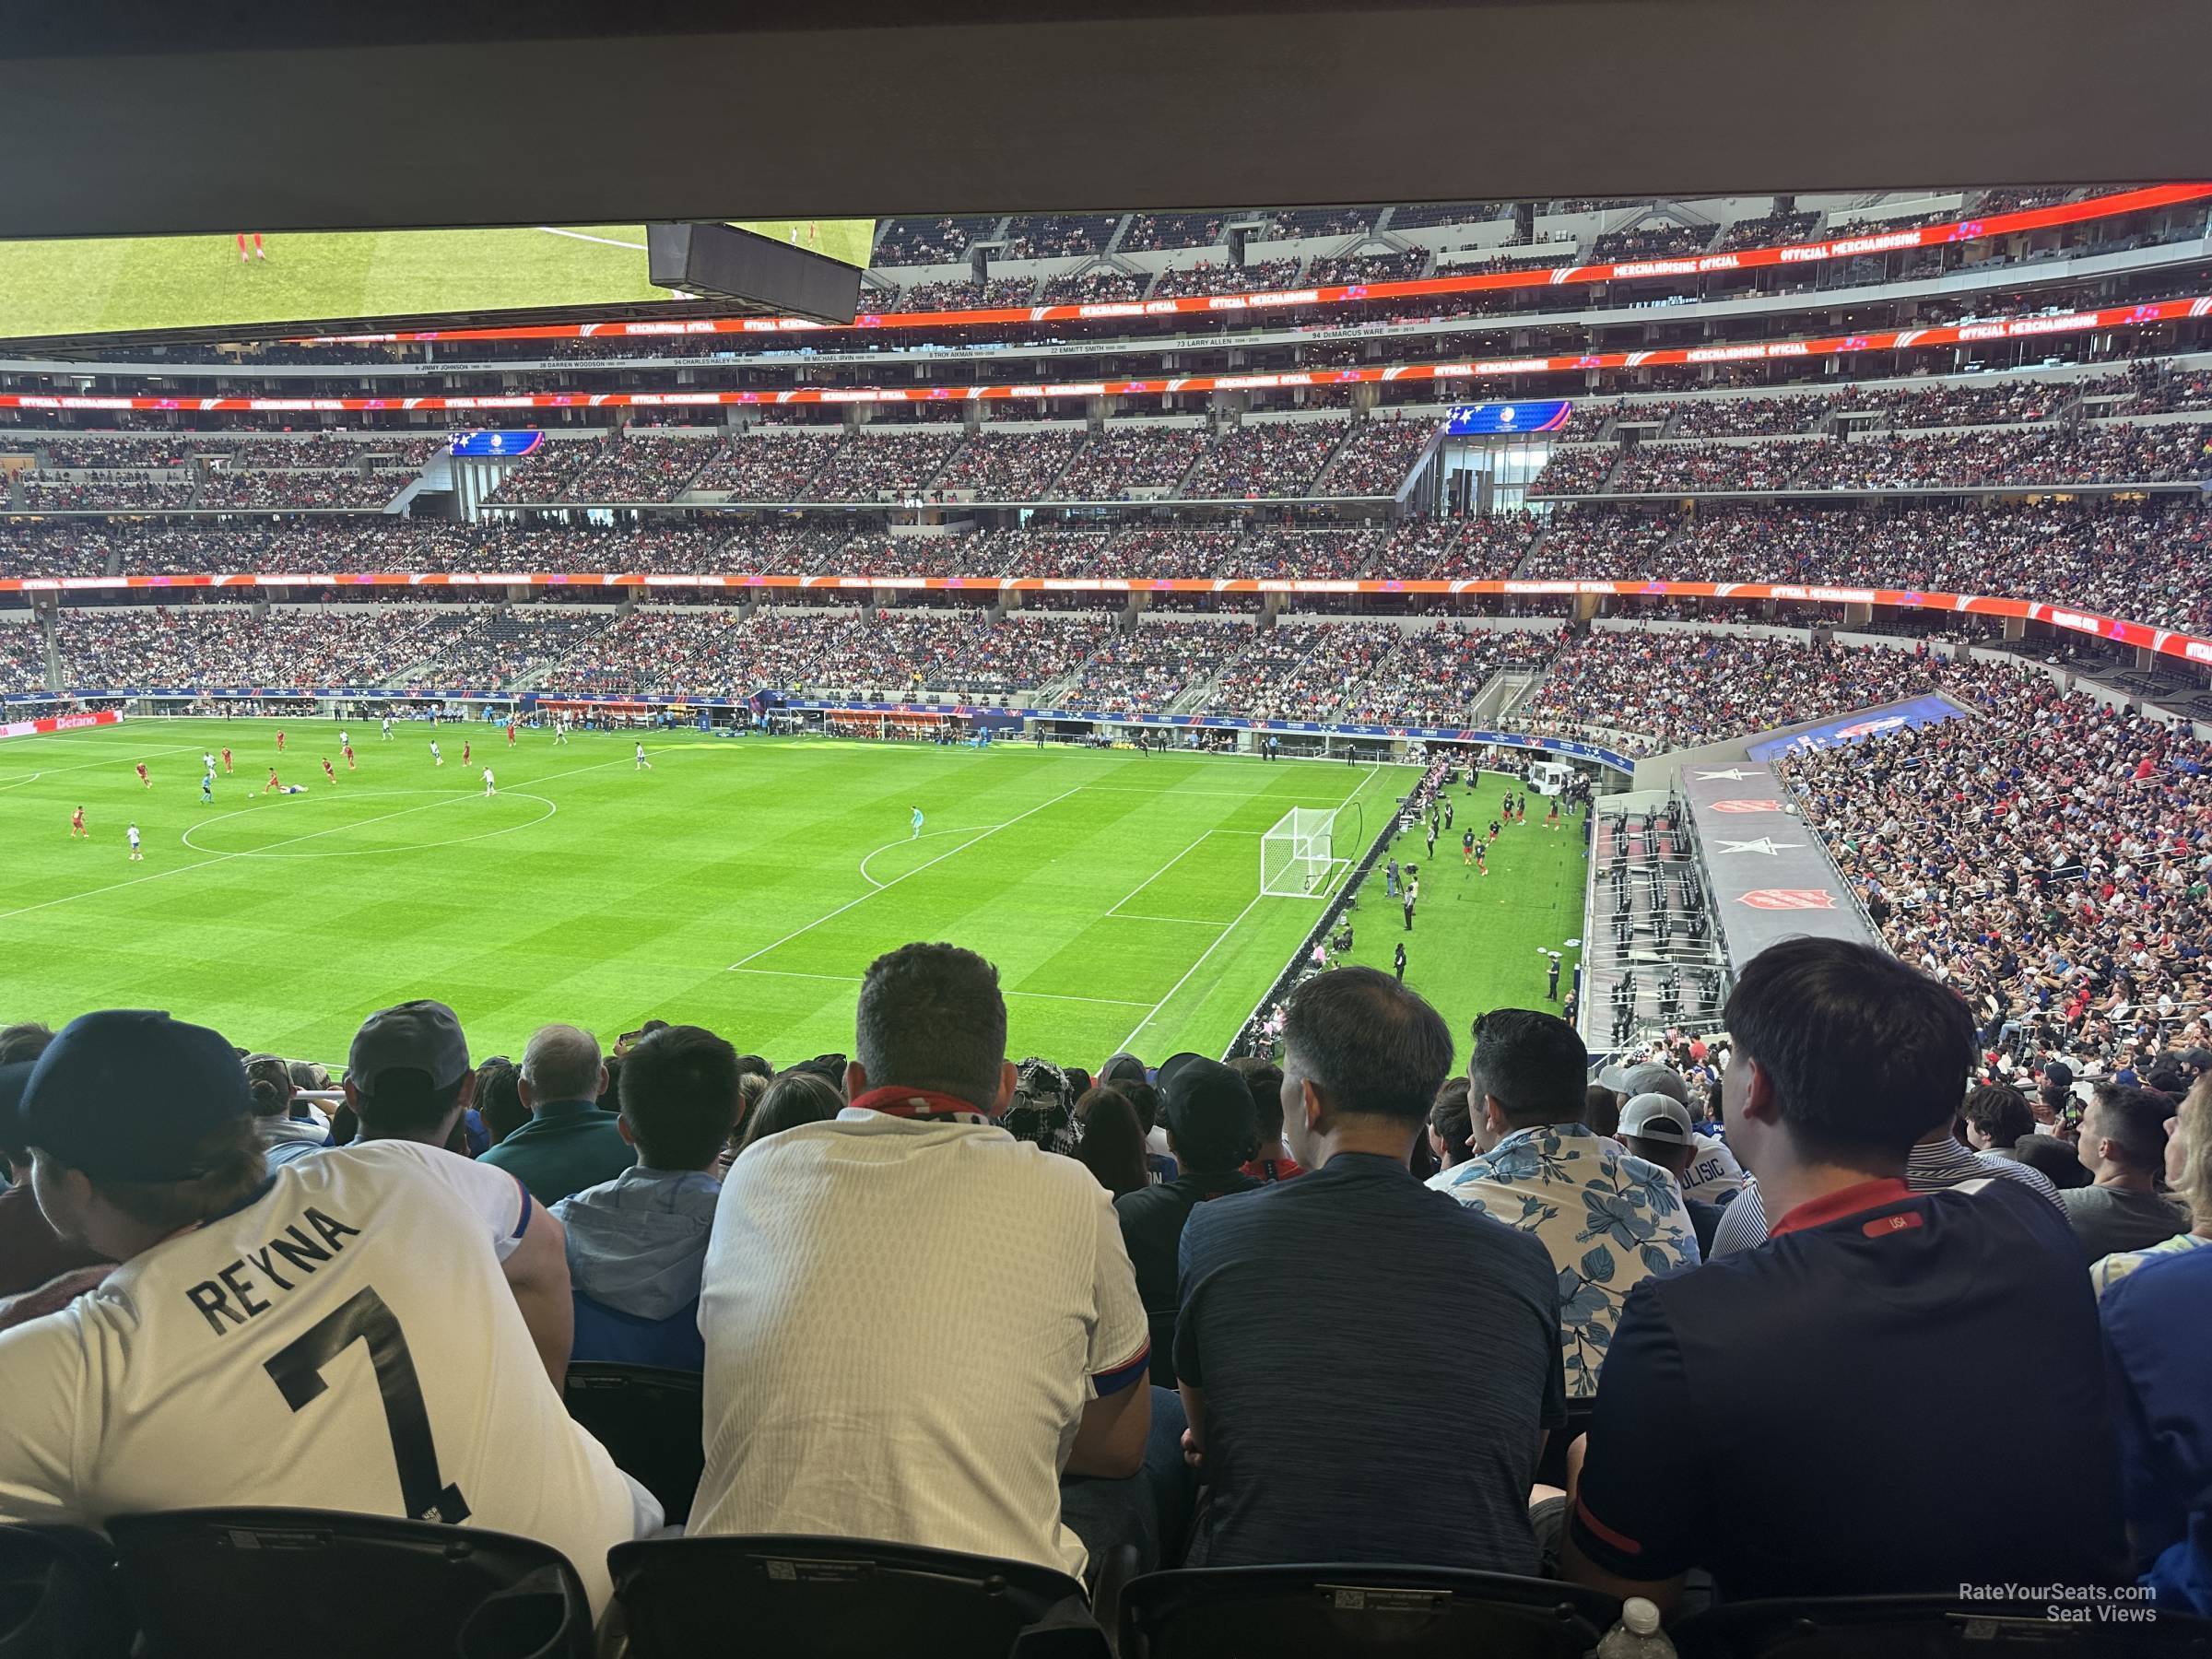 section 205, row 14 seat view  for soccer - at&t stadium (cowboys stadium)